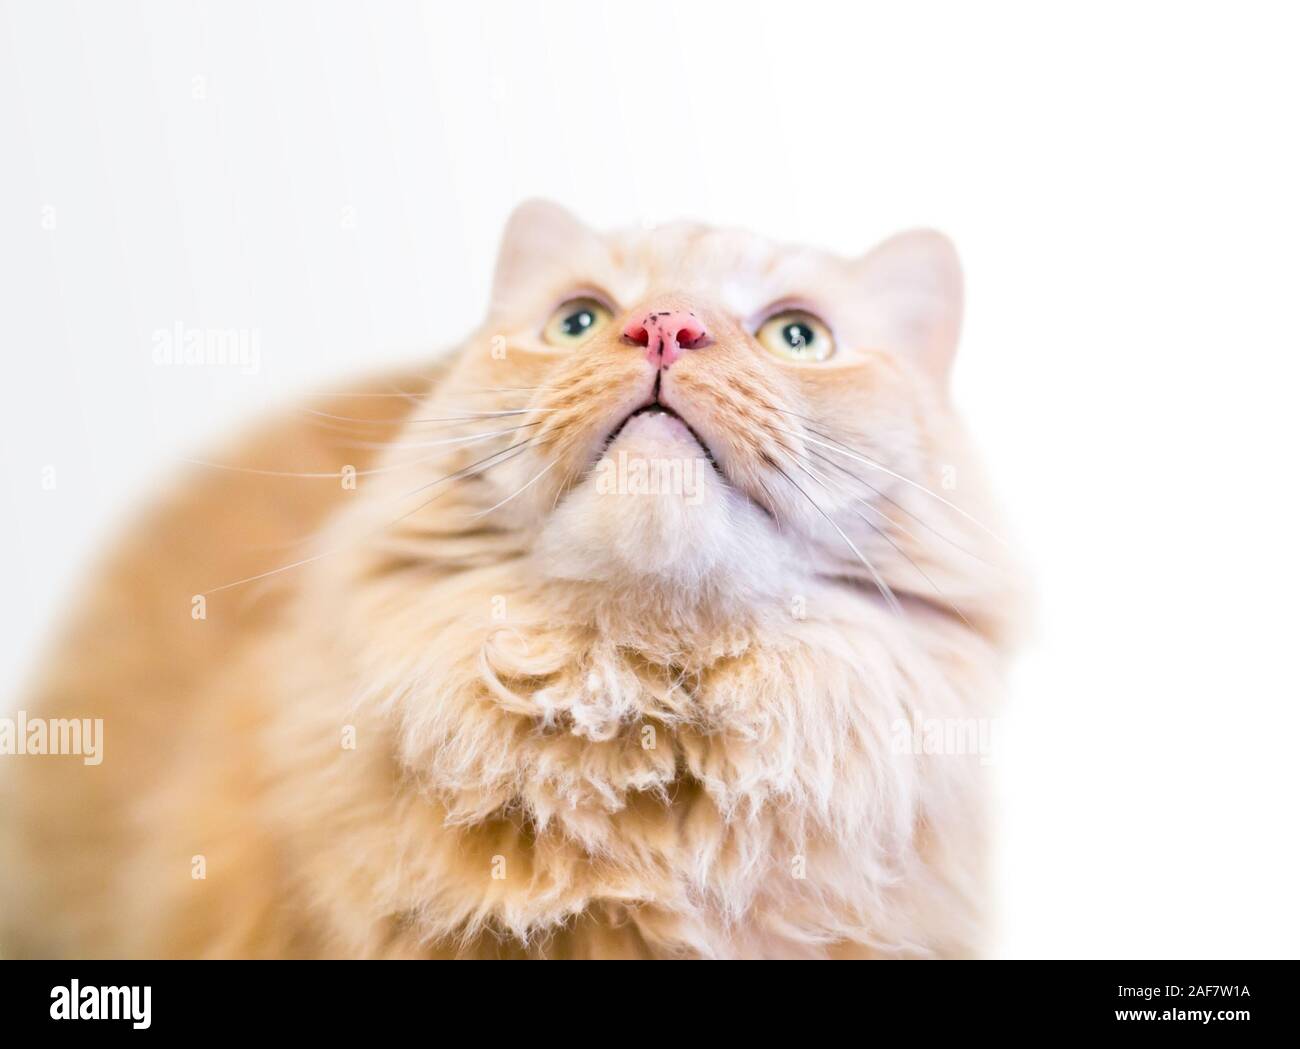 A fluffy orange tabby domestic longhair cat with freckles on its nose, looking up Stock Photo